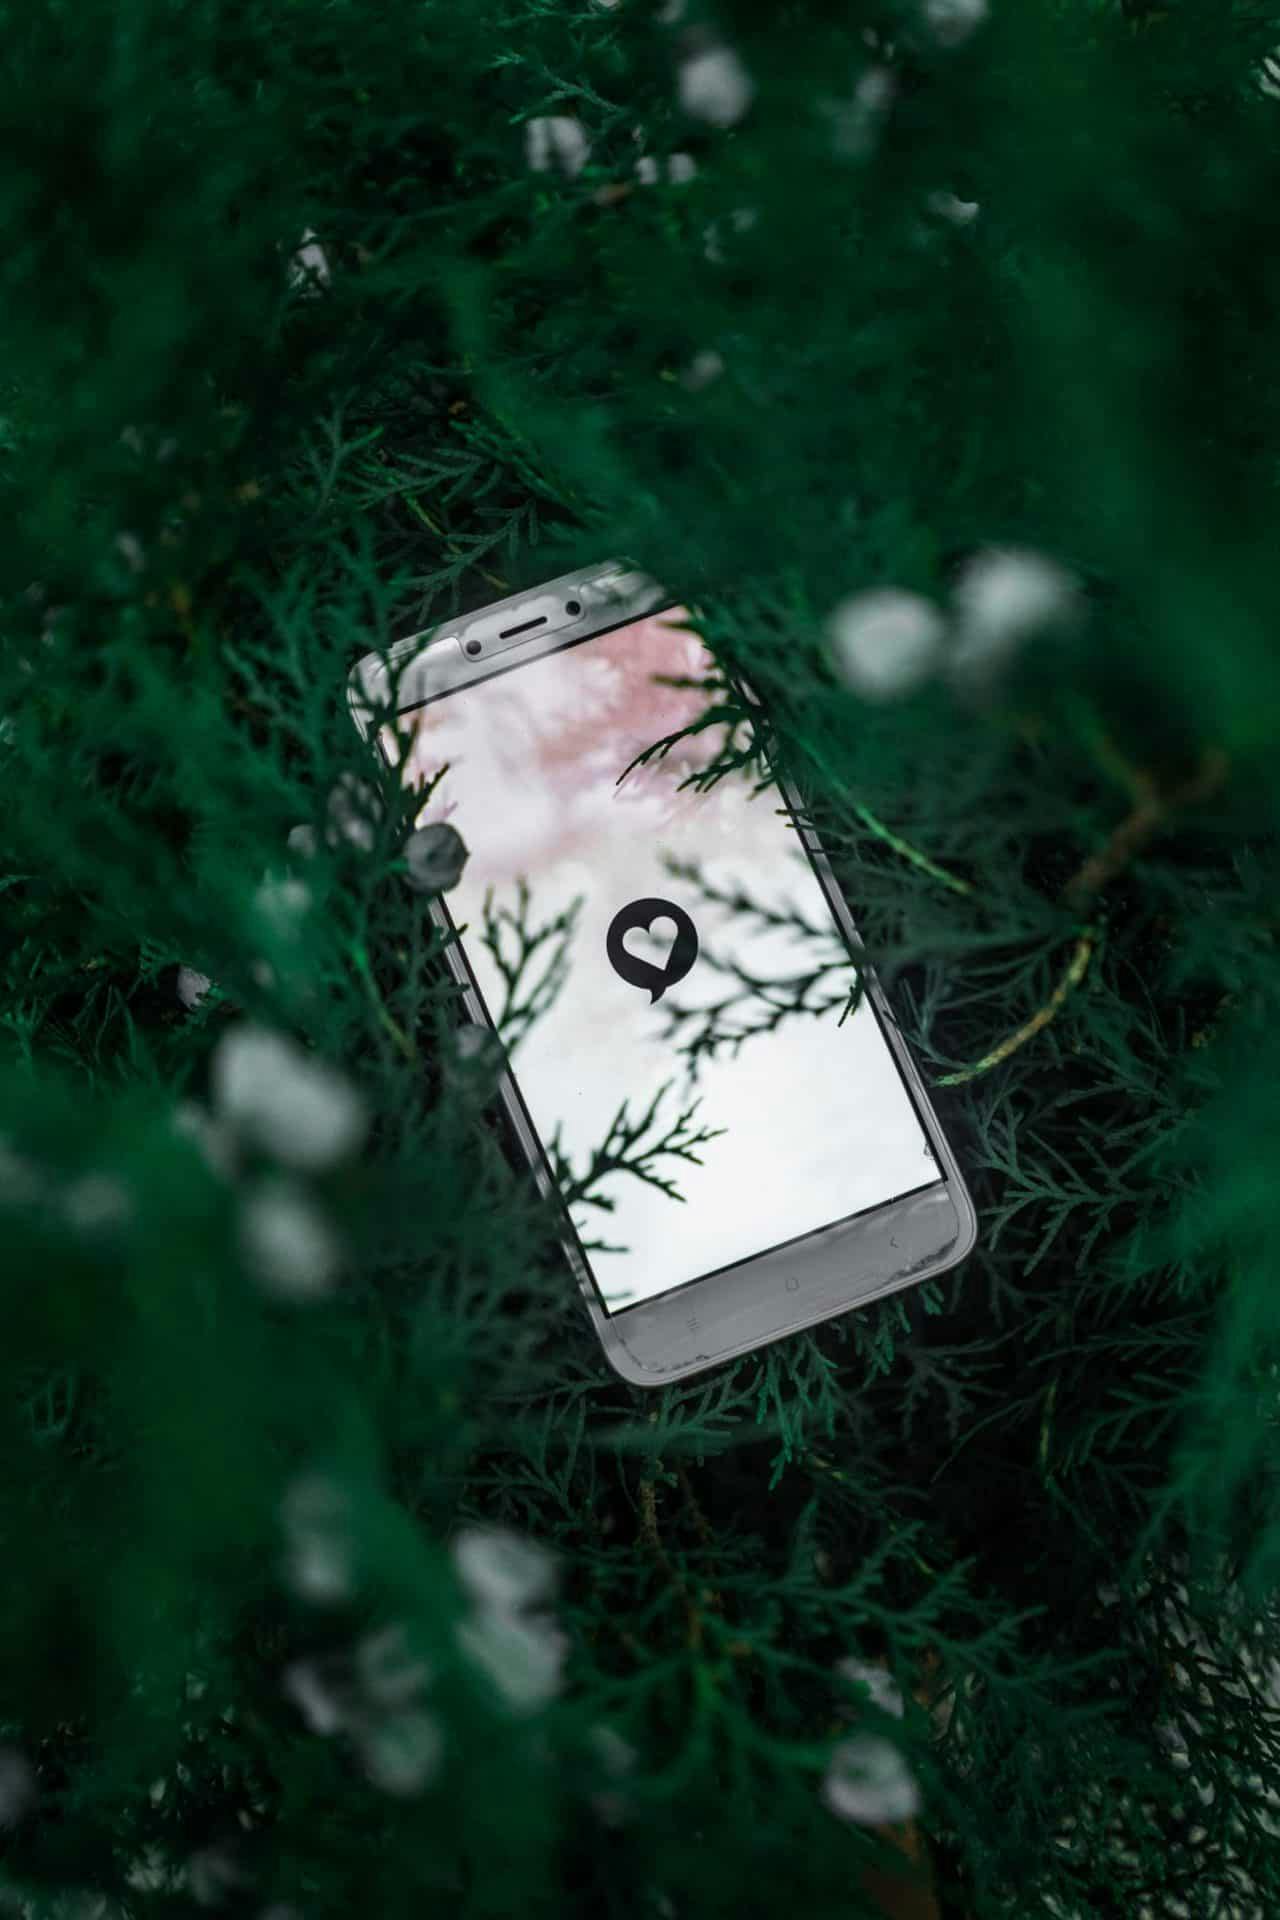 cellphone with heart picture surrounded by leaves